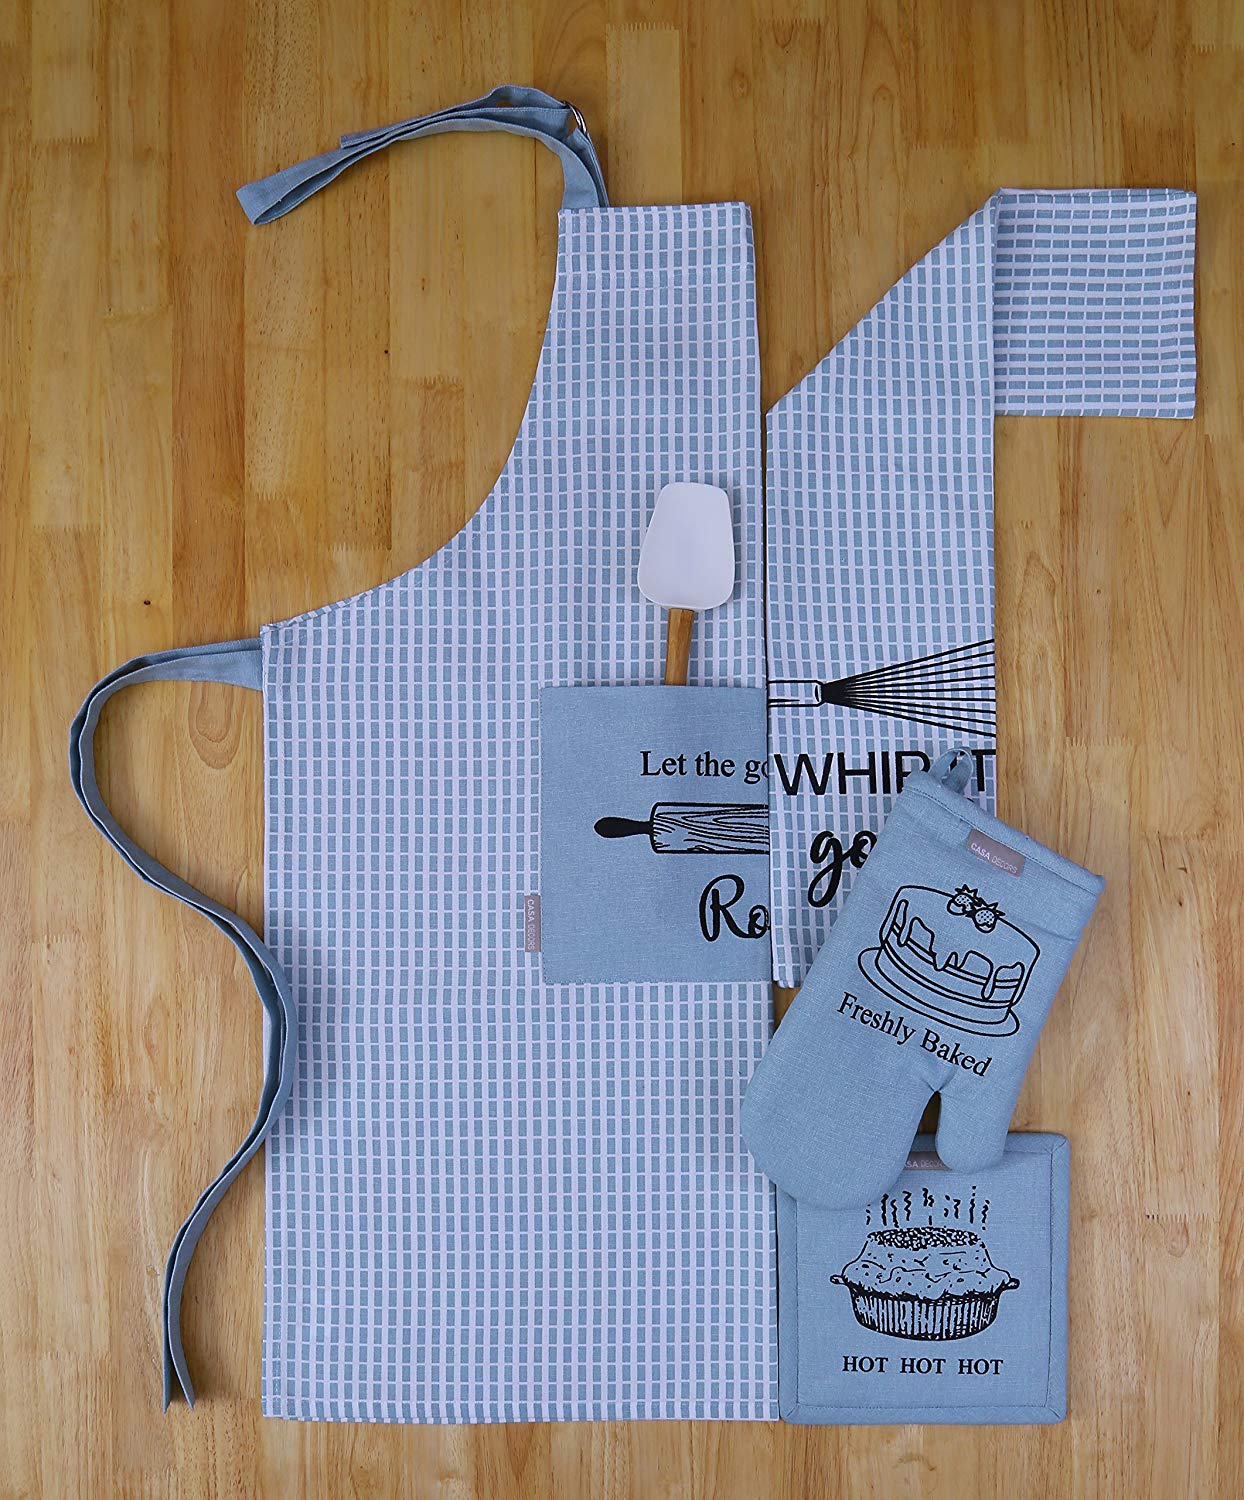 Set of Apron, Oven Mitt, Pot Holder, Kitchen Towel in a Baking Fun Design, Made of 100% Cotton, Eco-Friendly & Safe, Value Pack and Ideal Gift Set, Kitchen Linen Set By CASA DECORS